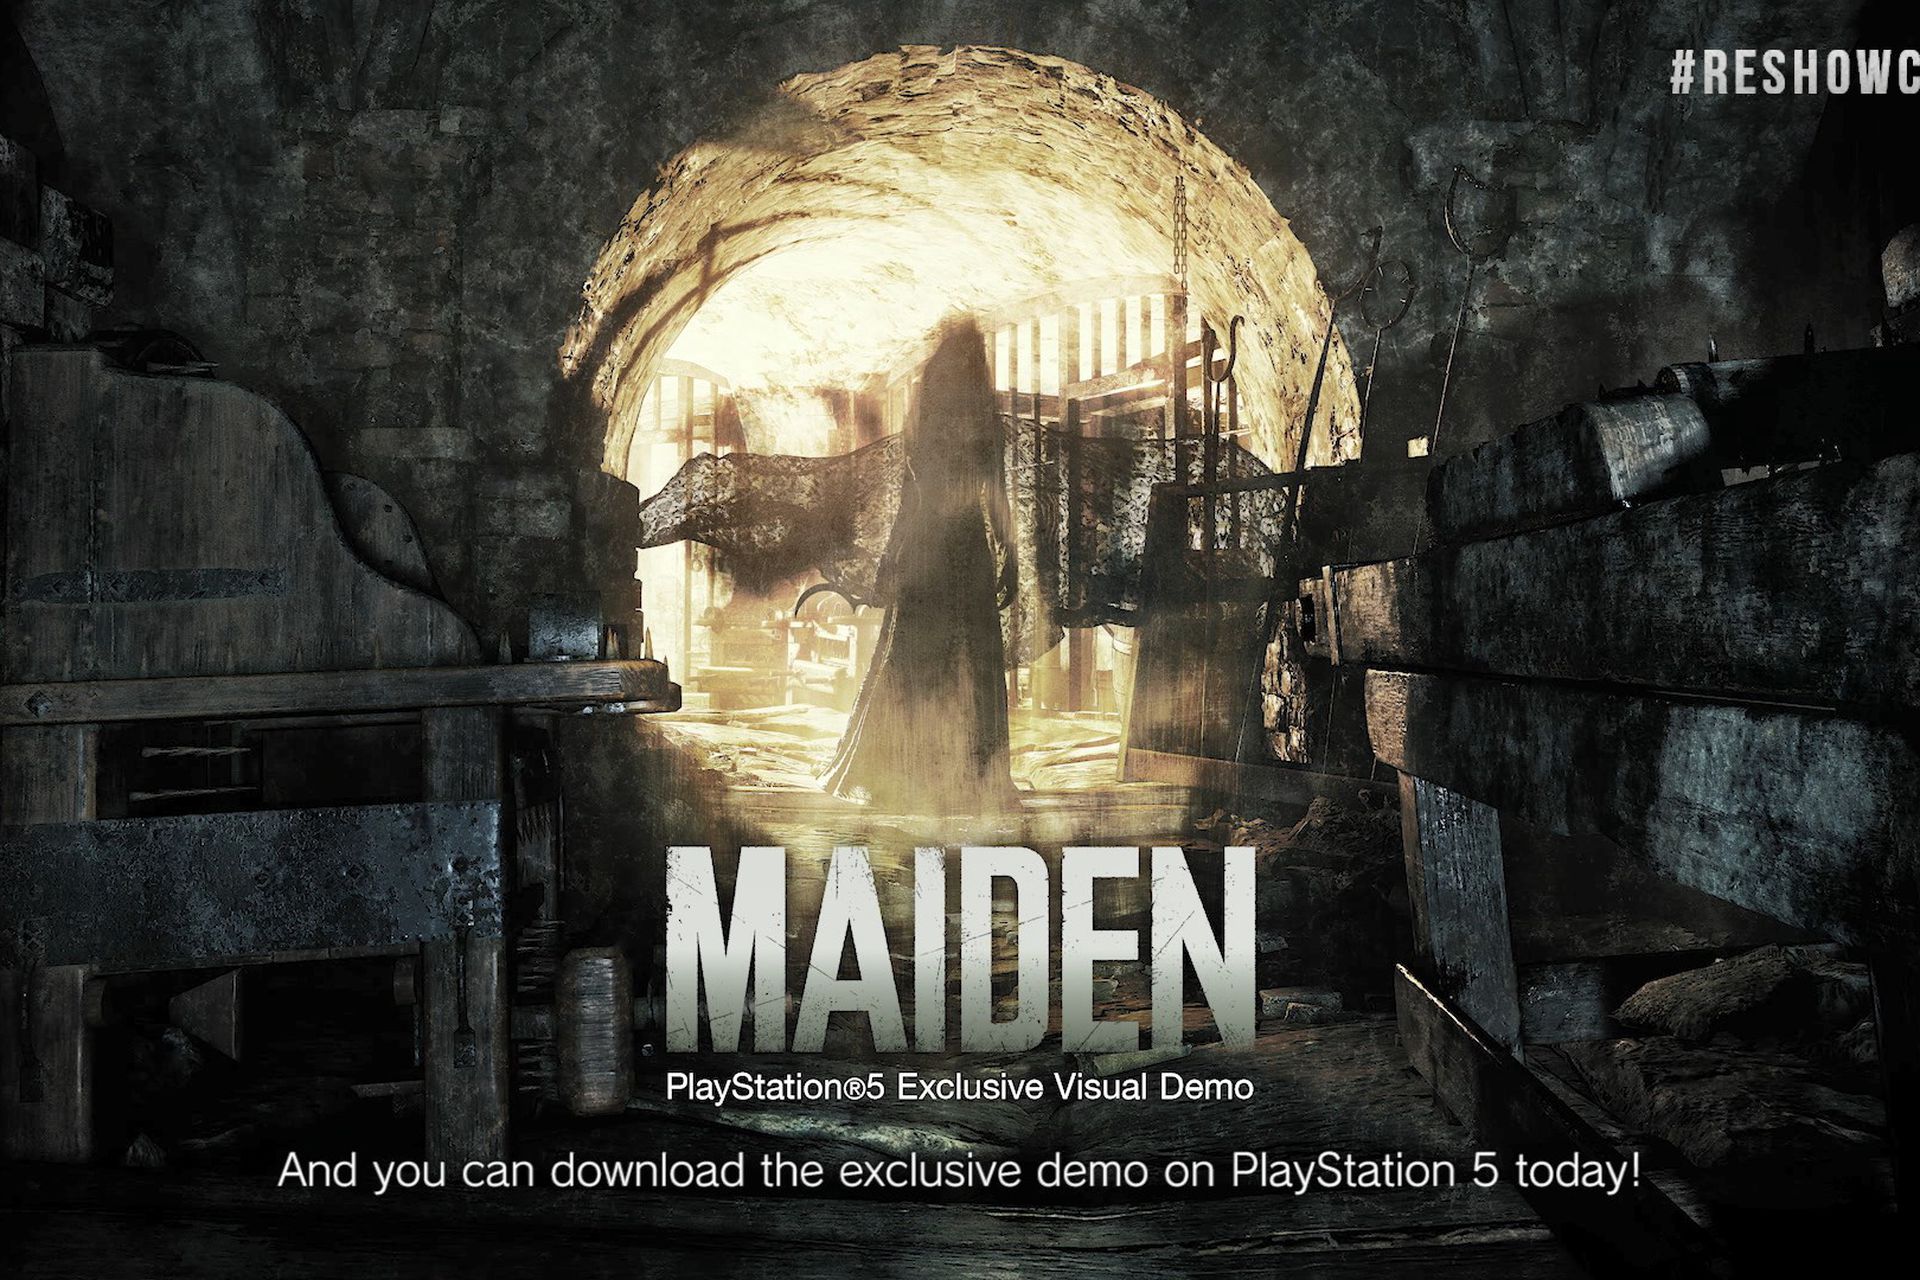 You can now play Resident Evil Village’s ‘Maiden’ demo on PS5 - The Verge